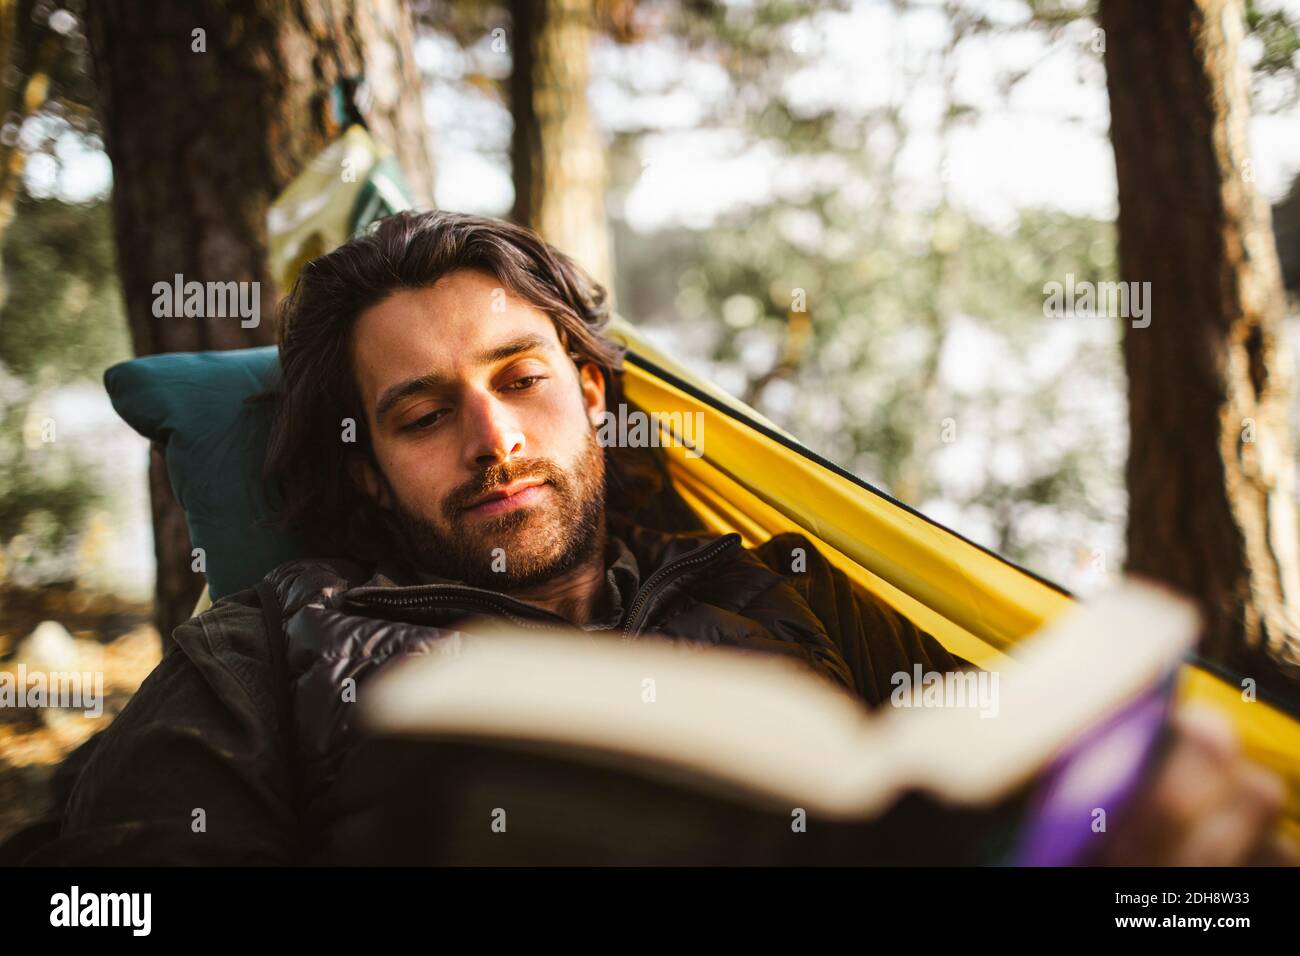 Young man reading book while lying on hammock in forest Stock Photo